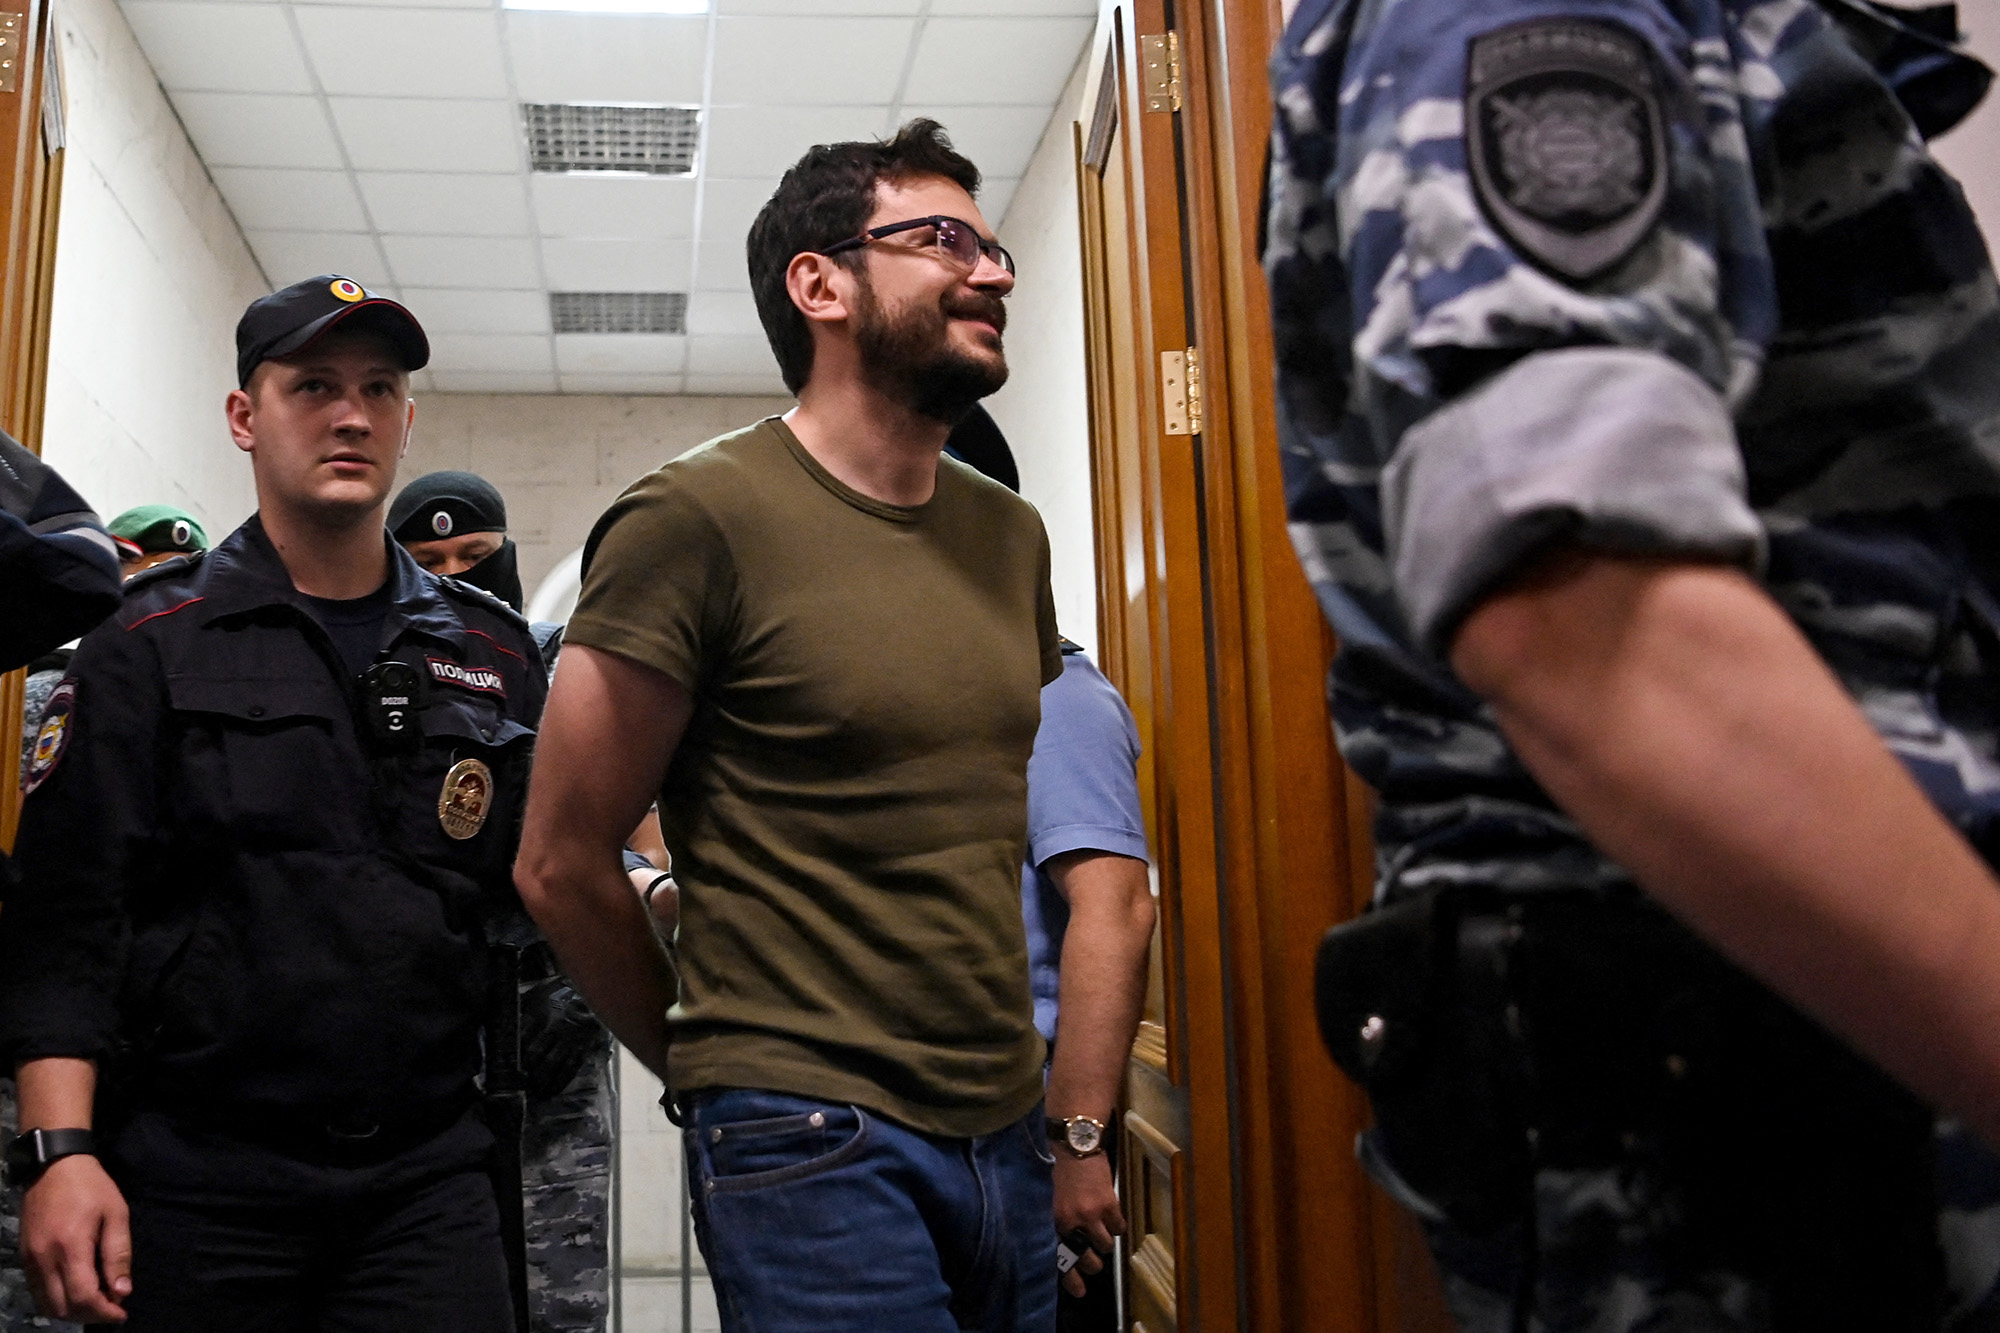 Russian opposition figure and former Moscow city councillor Ilya Yashin is escorted inside the Basmanny district court prior to a hearing on his detention in Moscow, Russia, on July 13.